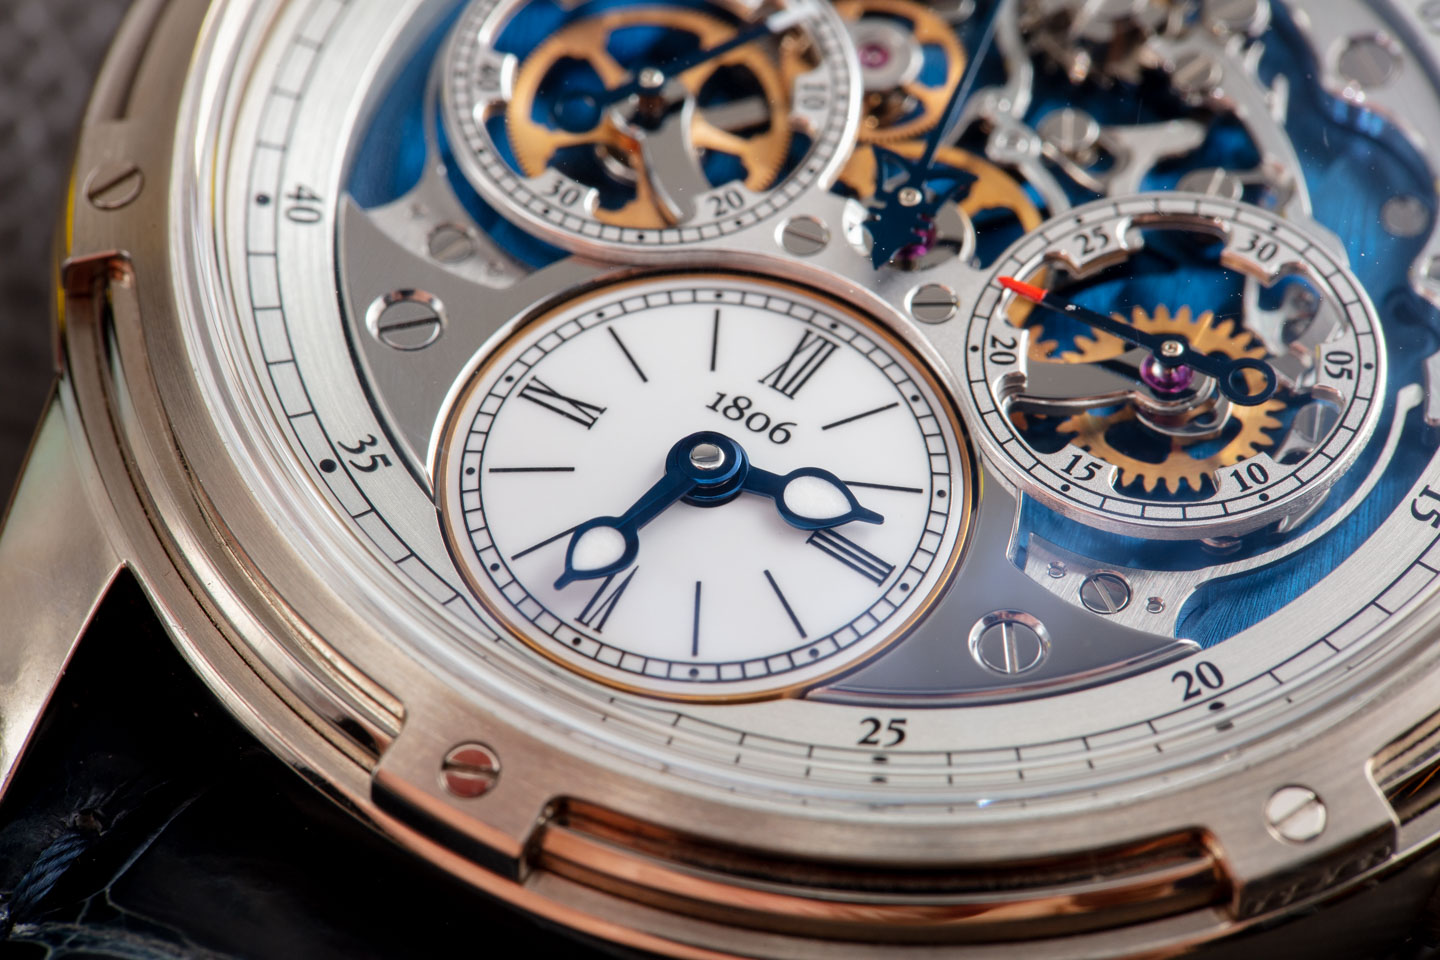 Louis Moinet Memoris 200th anniversary limited edition - Time